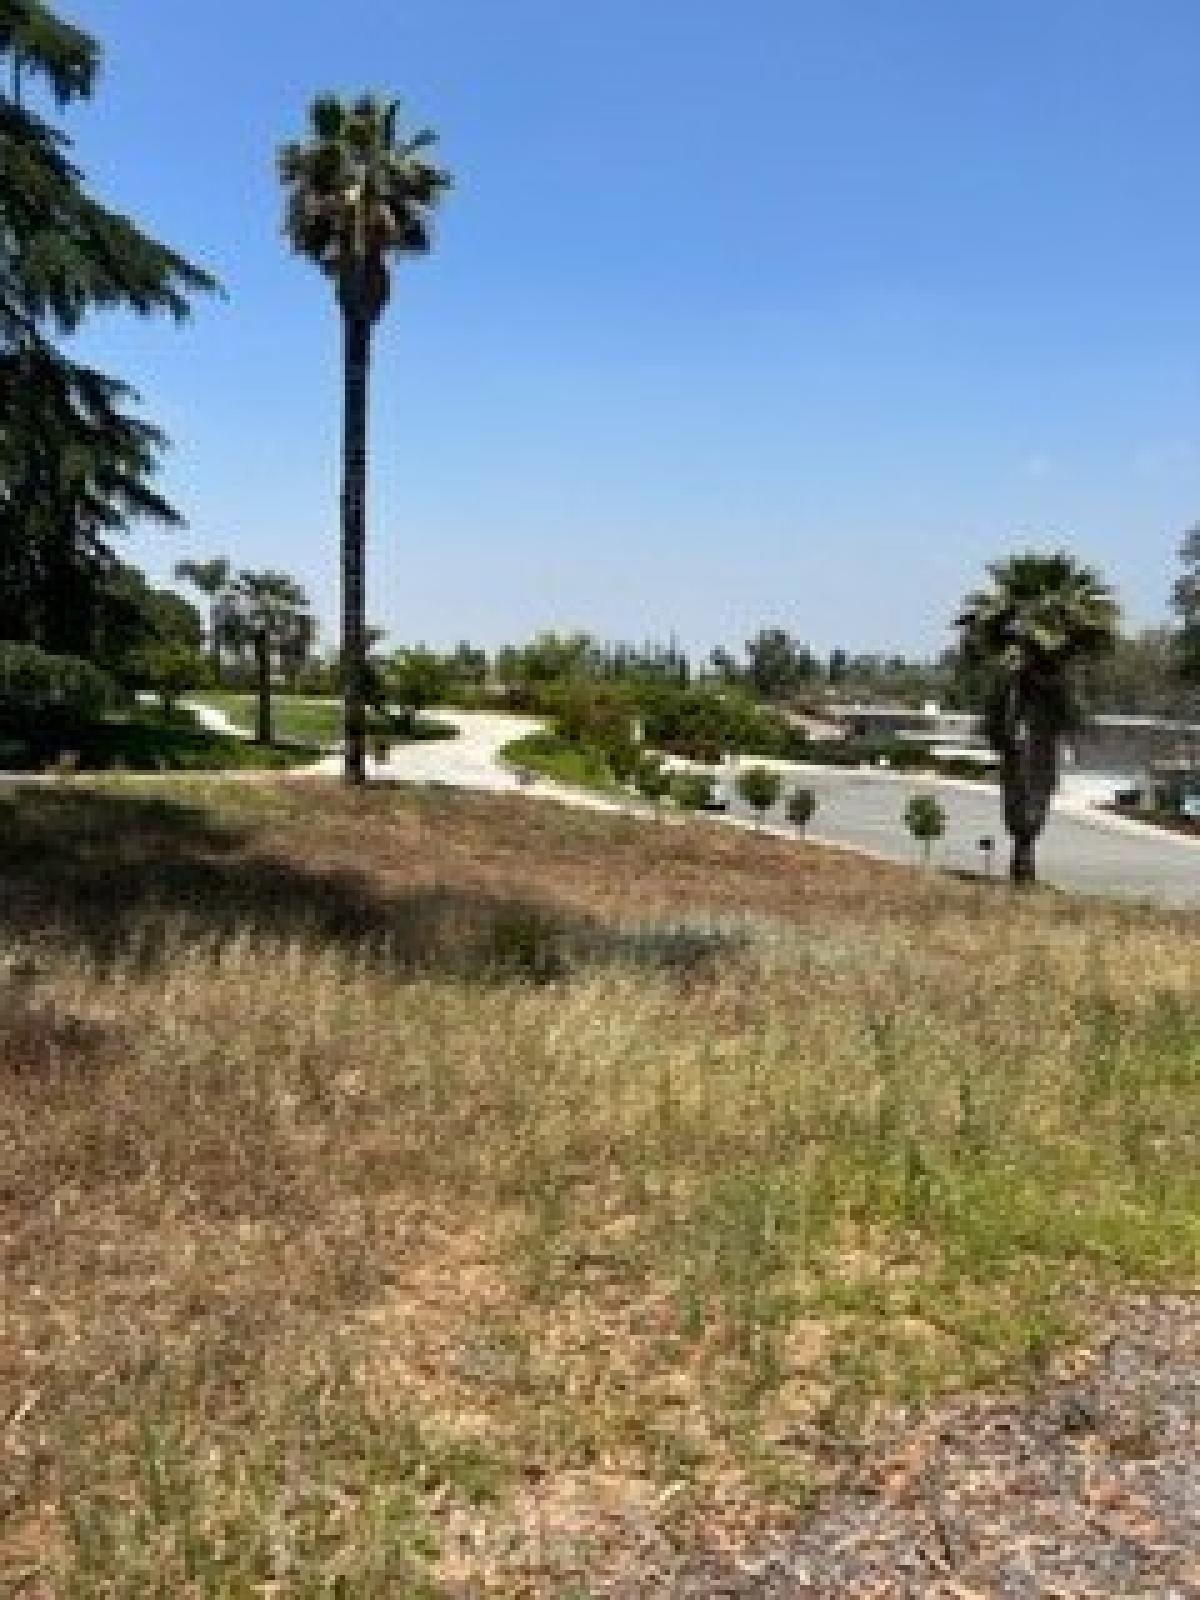 Picture of Residential Land For Sale in Redlands, California, United States